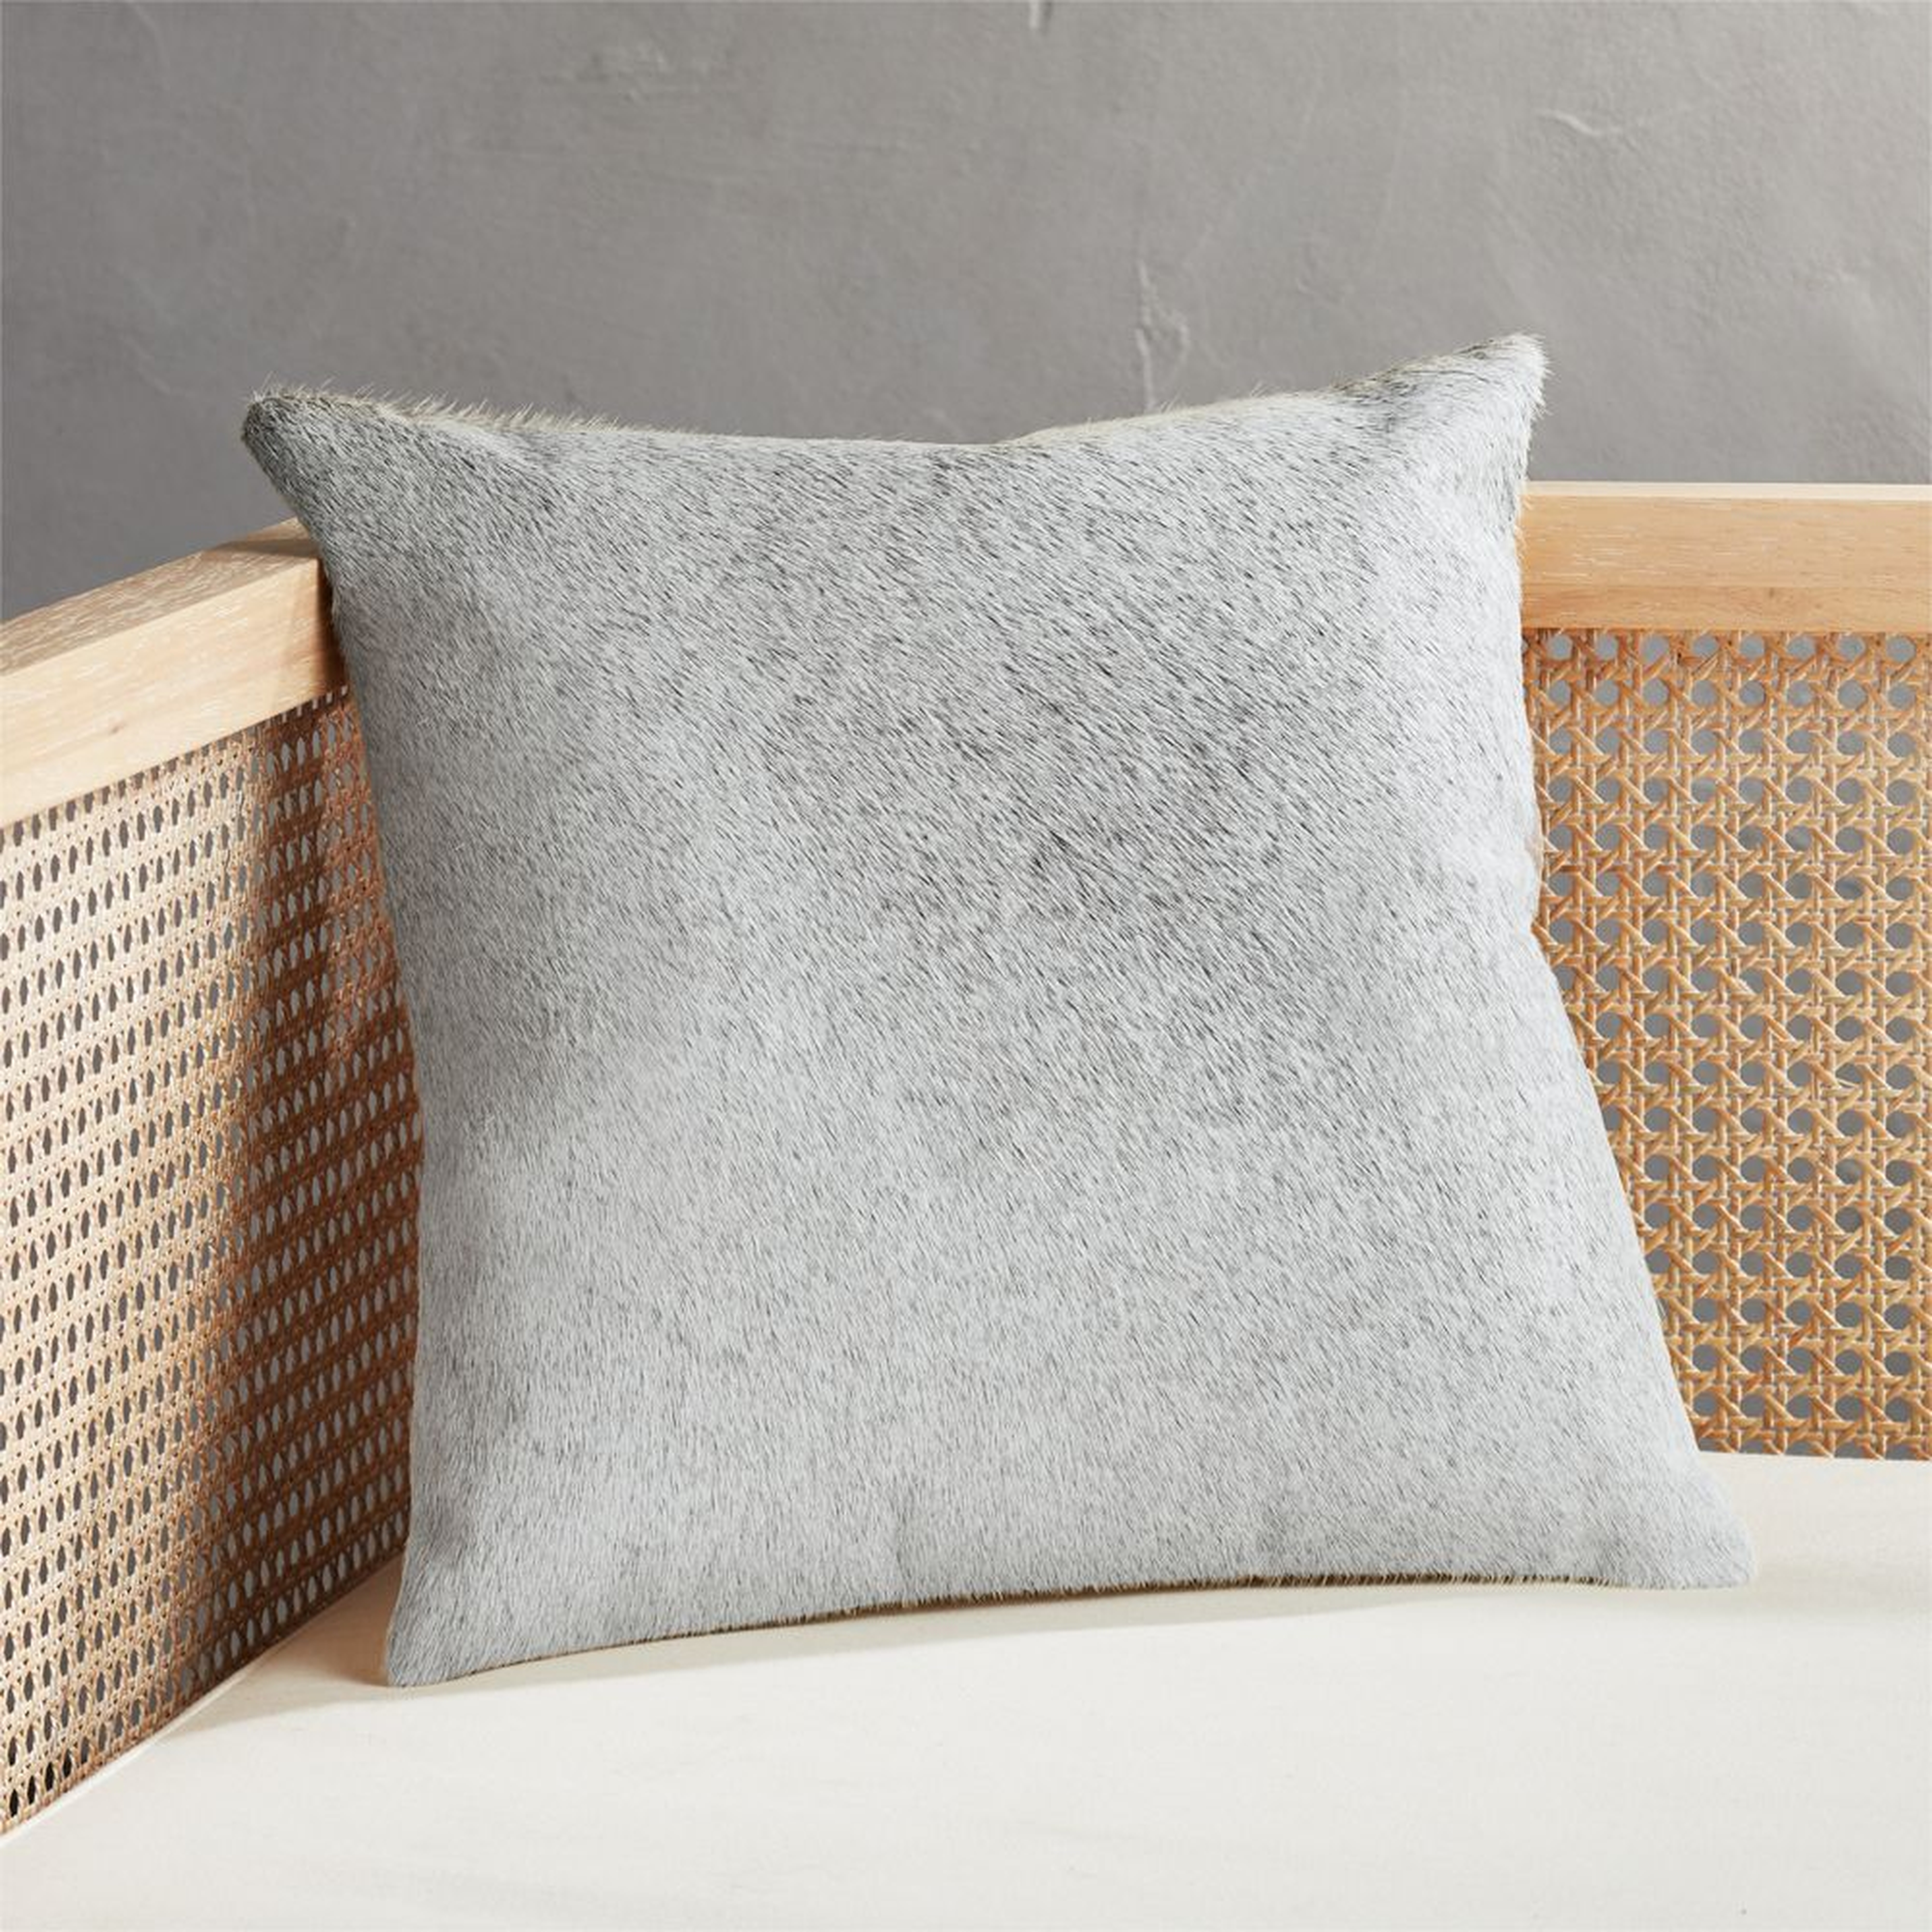 16" Grey and Neutral Cowhide Pillow with Down-Alternative Insert - CB2